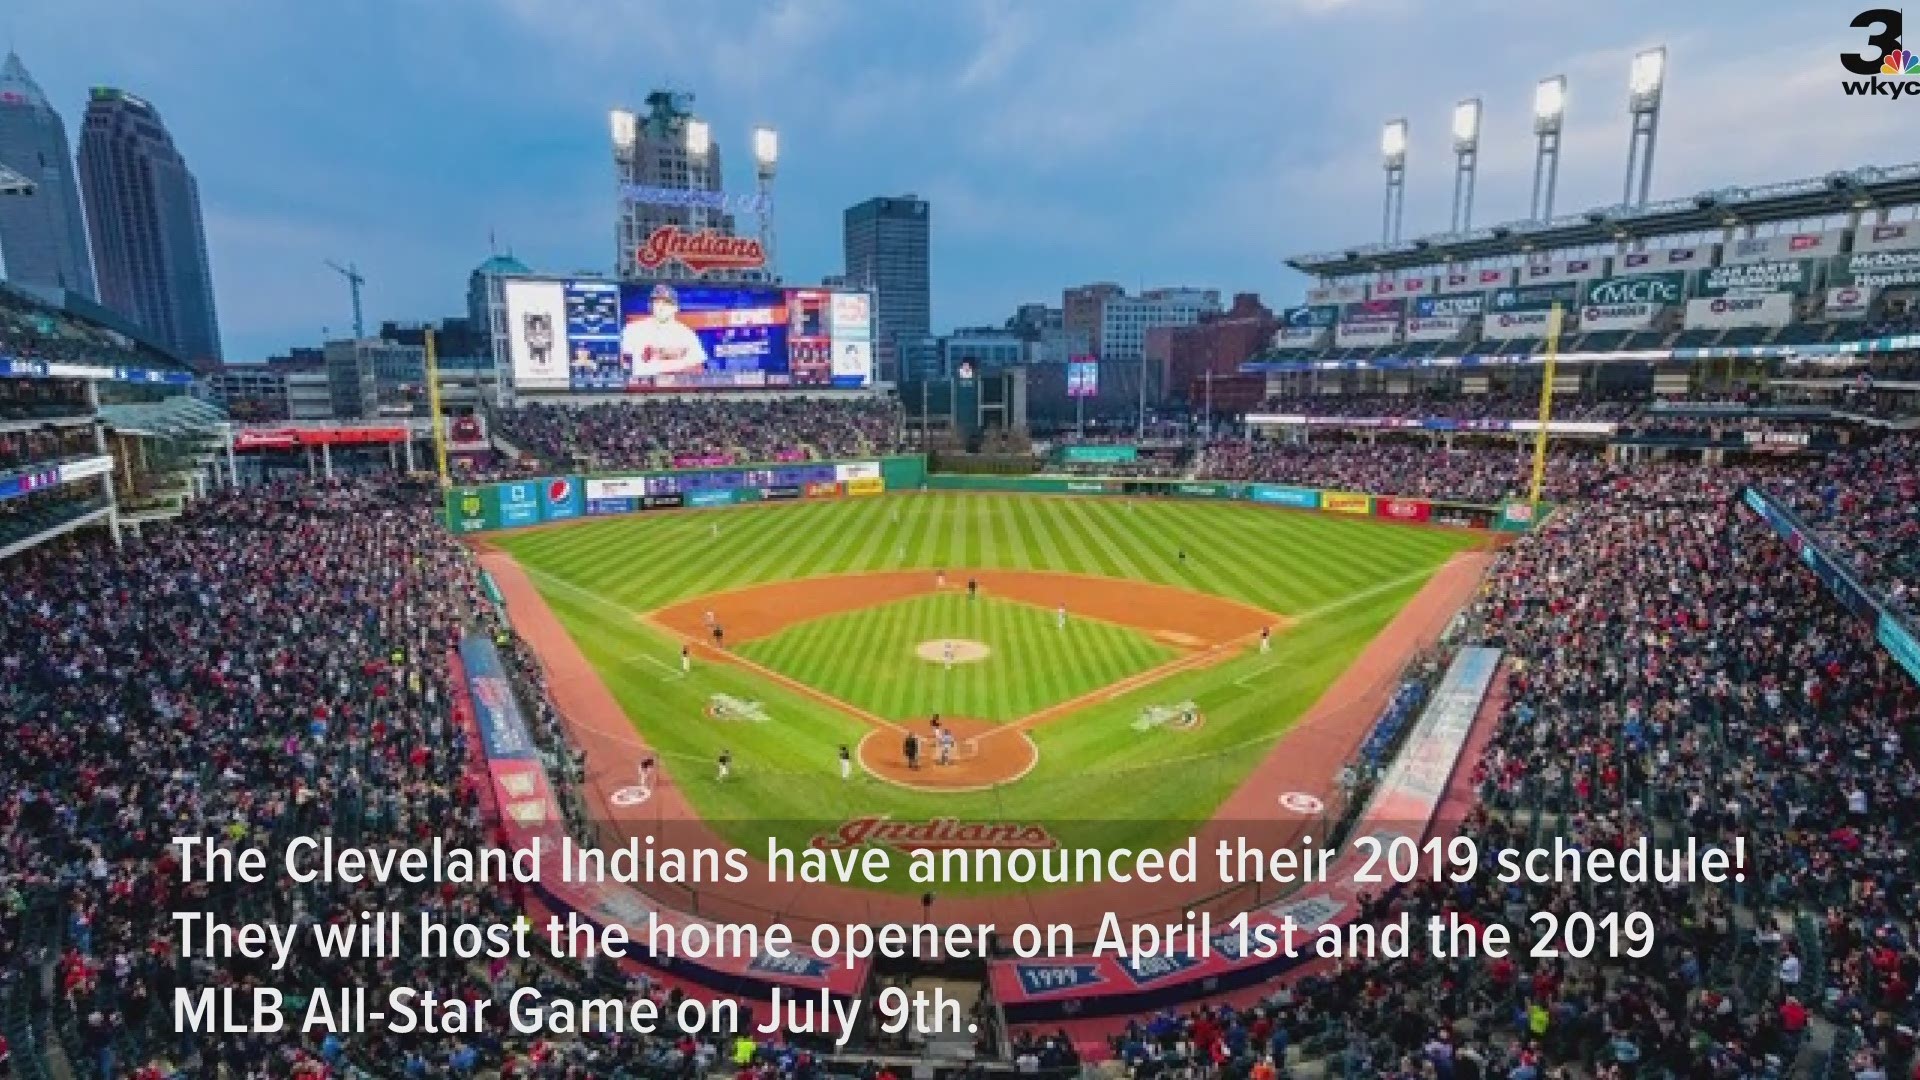 Cleveland Indians announce 2019 schedule, will host home opener April 1, MLB  All-Star Game July 9